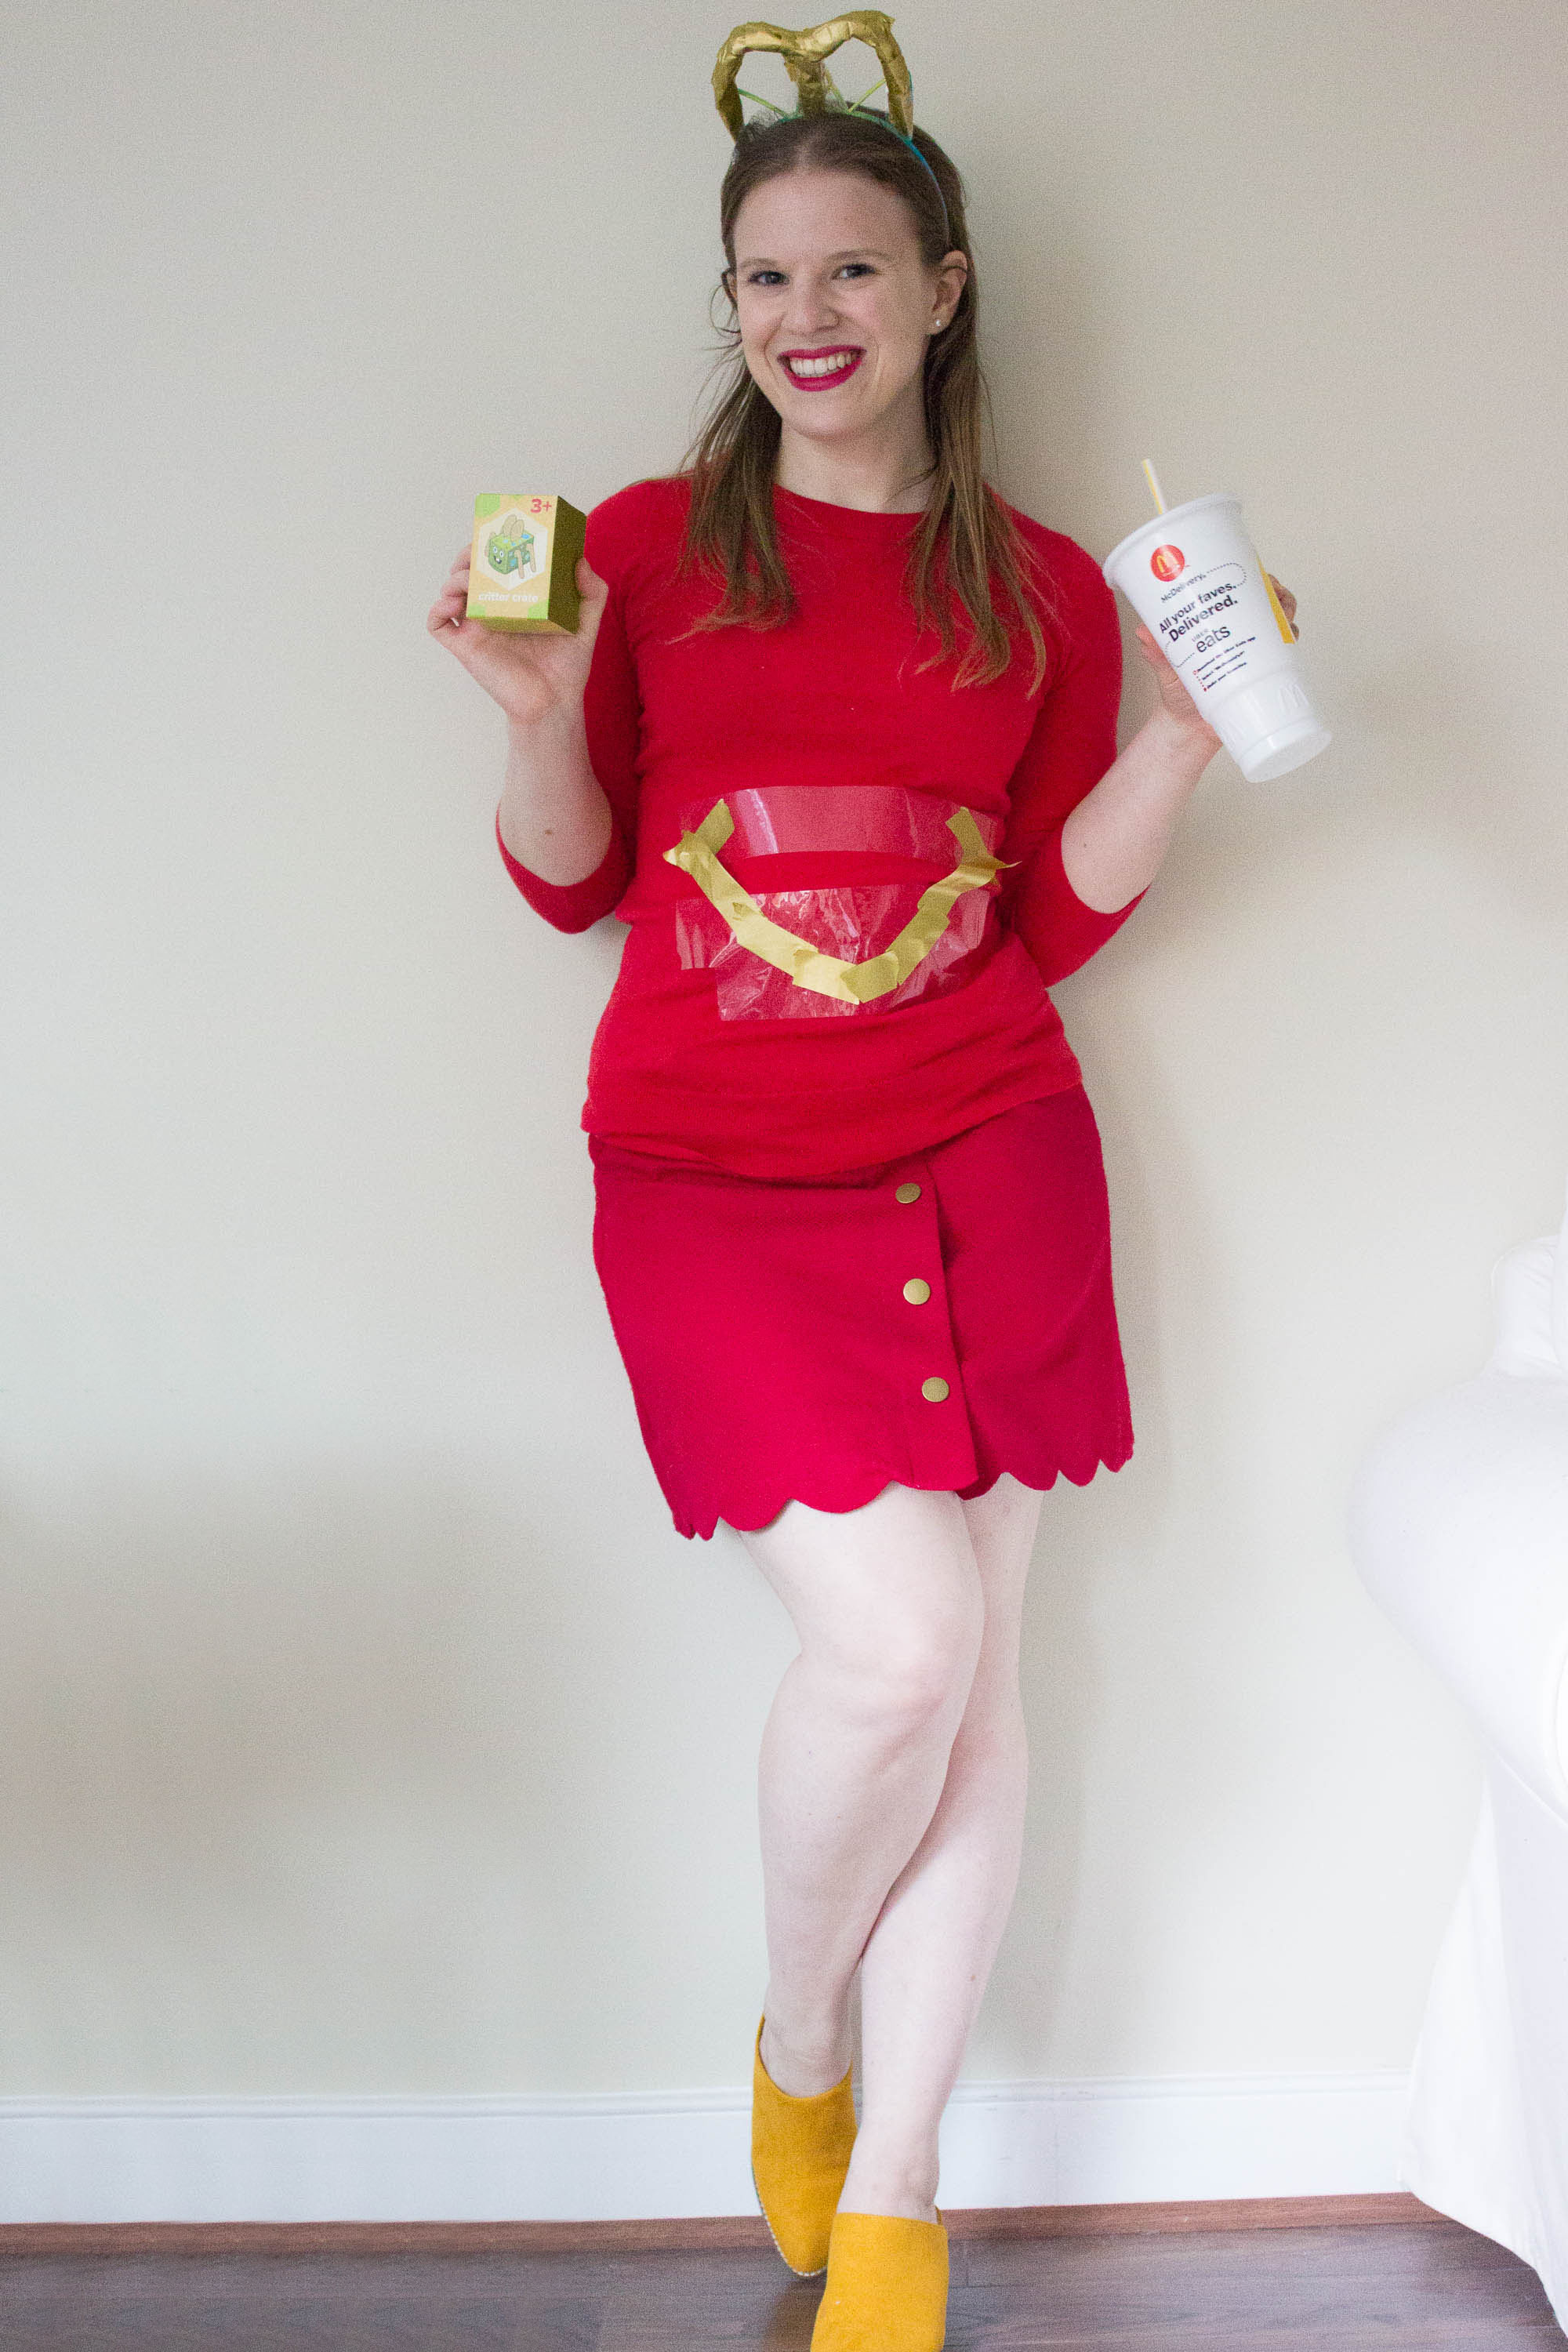 dc blogger wearing mcdonalds happy meal costume